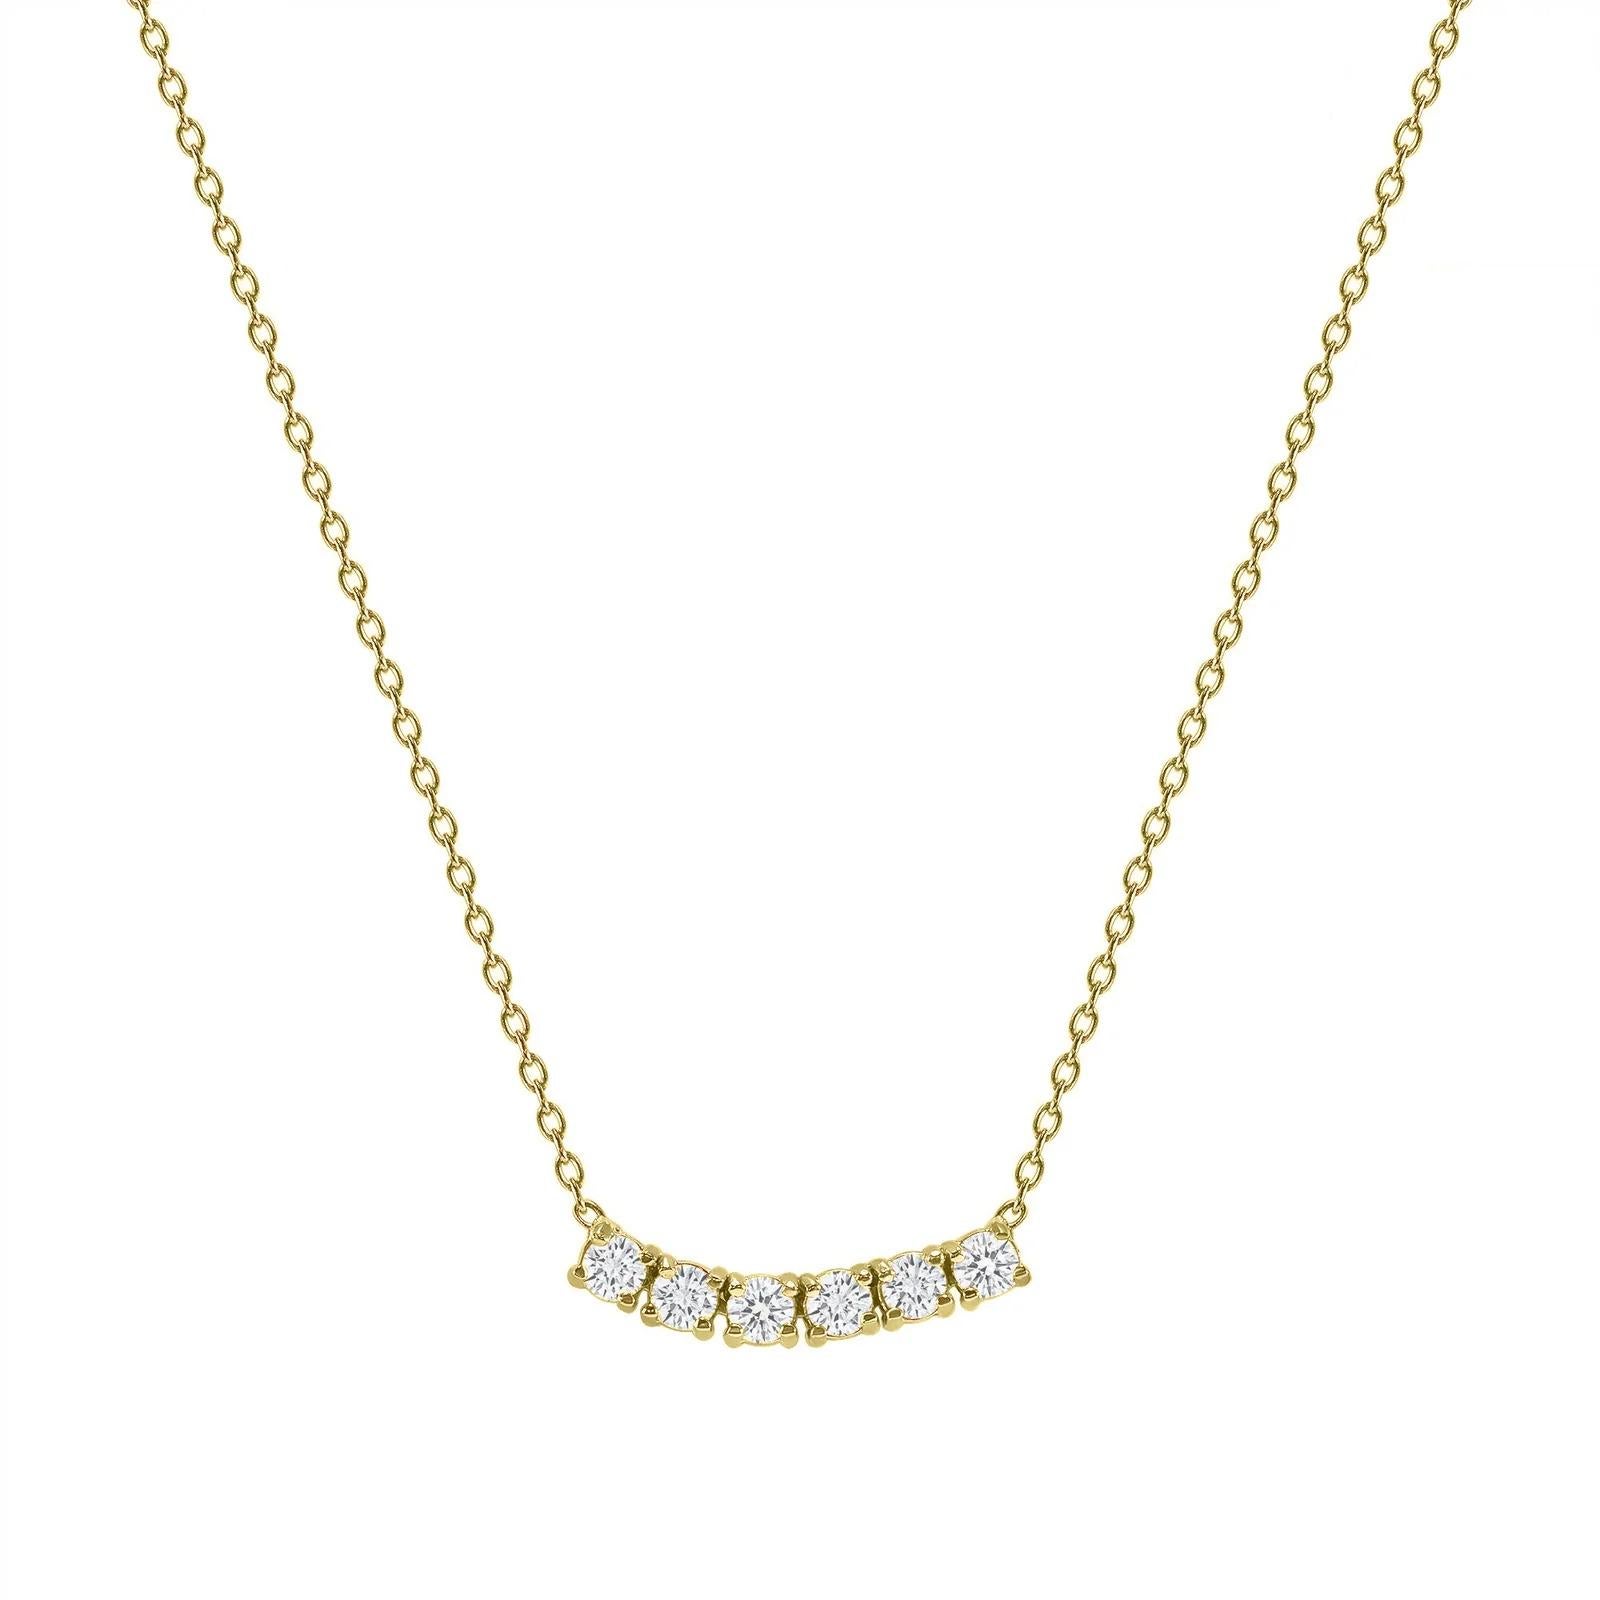 This petite, curved diamond necklace is crafted with gorgeous 14k gold set with six round diamonds.  

Gold: 14k 
Diamond Total Carats: 1 ct
Diamond Cut: Round (6 diamonds)
Diamond Clarity: VS
Diamond Color: F
Color: Yellow Gold
Necklace Length: 24